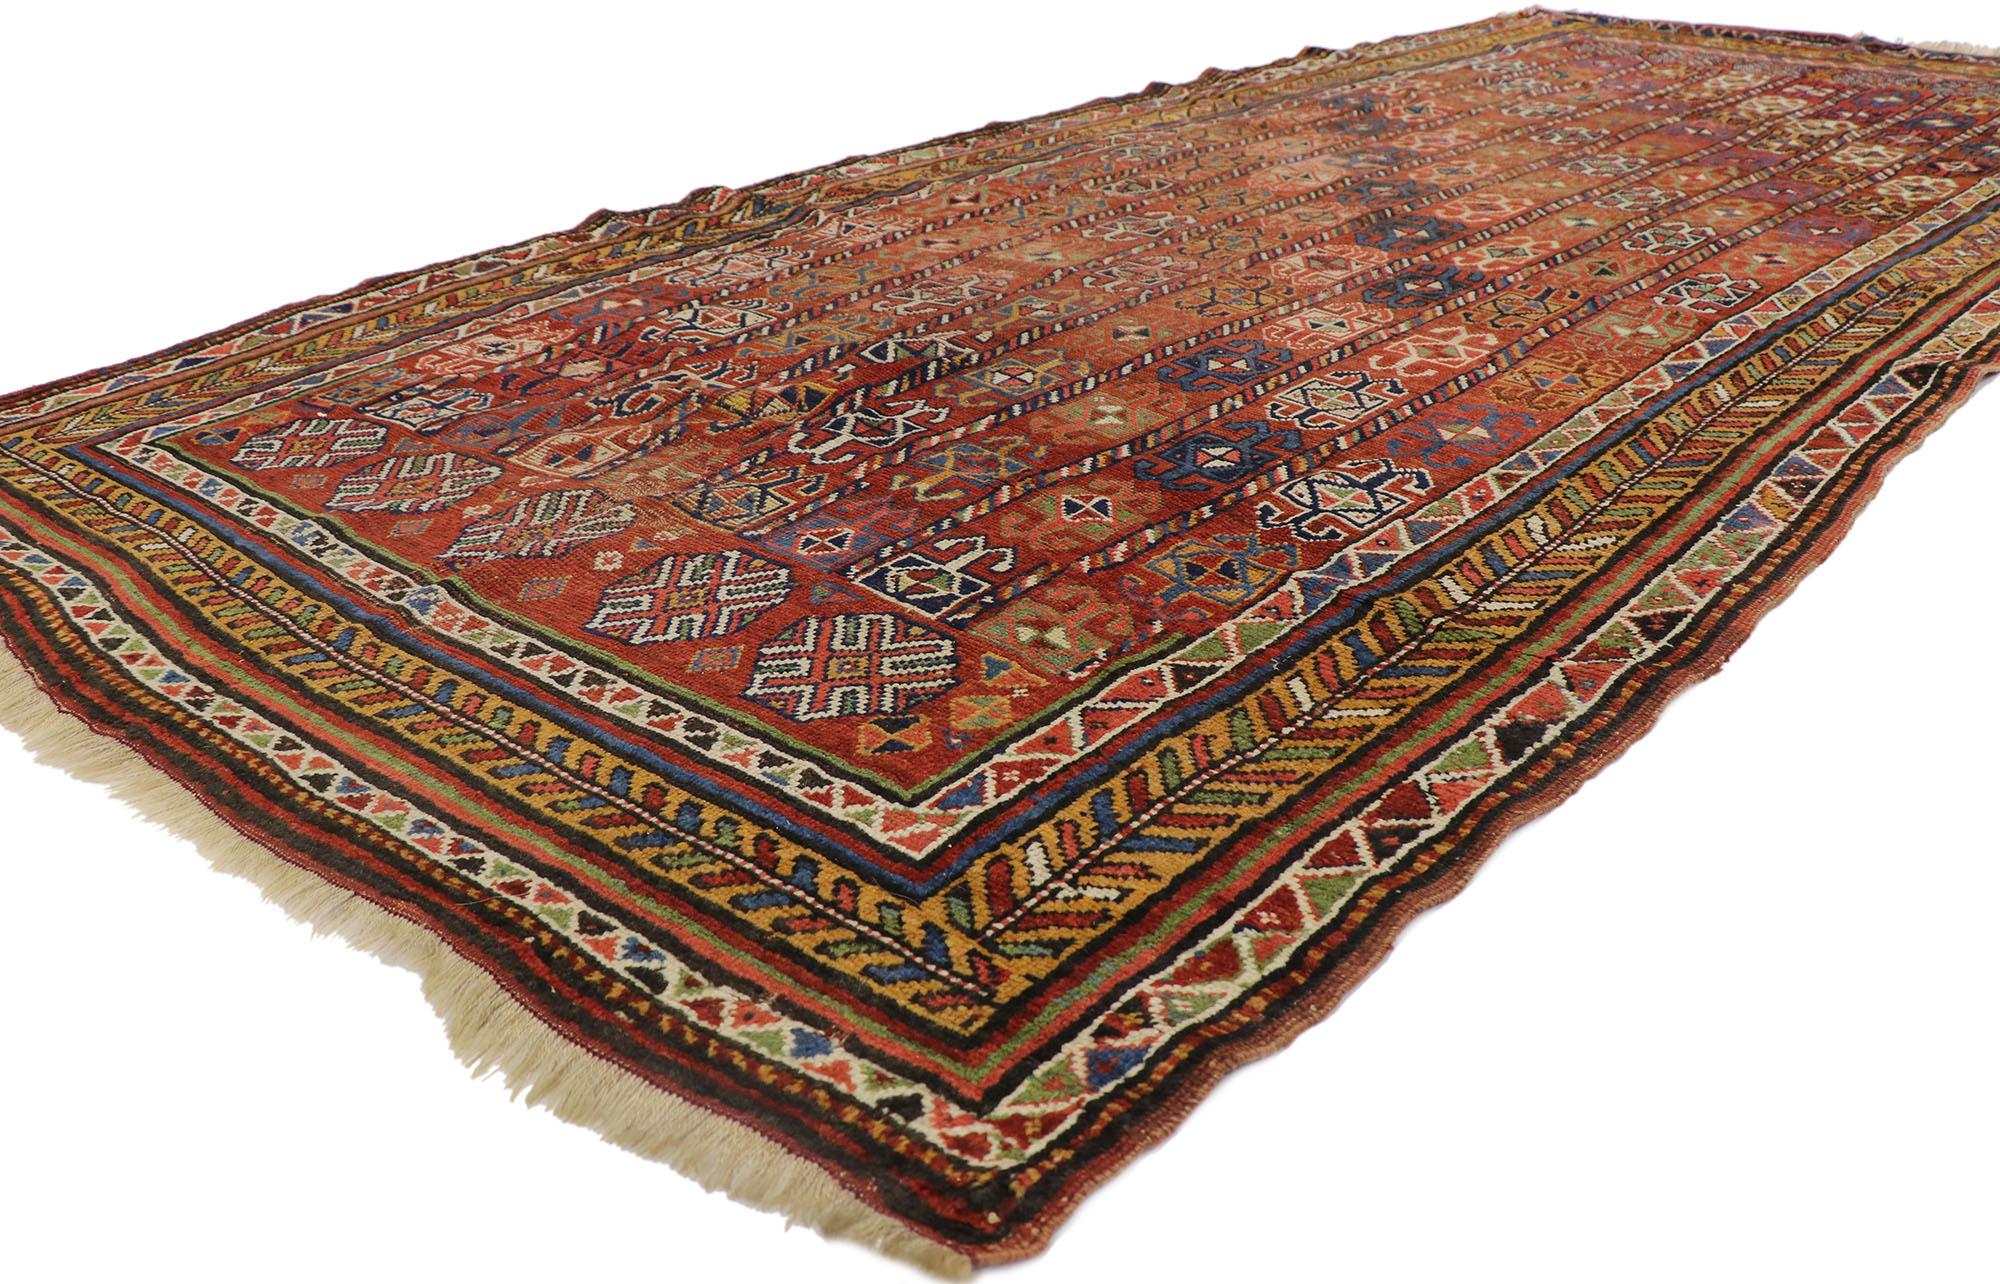 78010 Antique Afghan Bashir Rug, 05'07 x 12'06. Embark on a journey where tribal mystique seamlessly intertwines with the relaxed refined ambiance of a rustic lodge in this meticulously hand-knotted wool antique Afghan Bashir rug. Immerse yourself